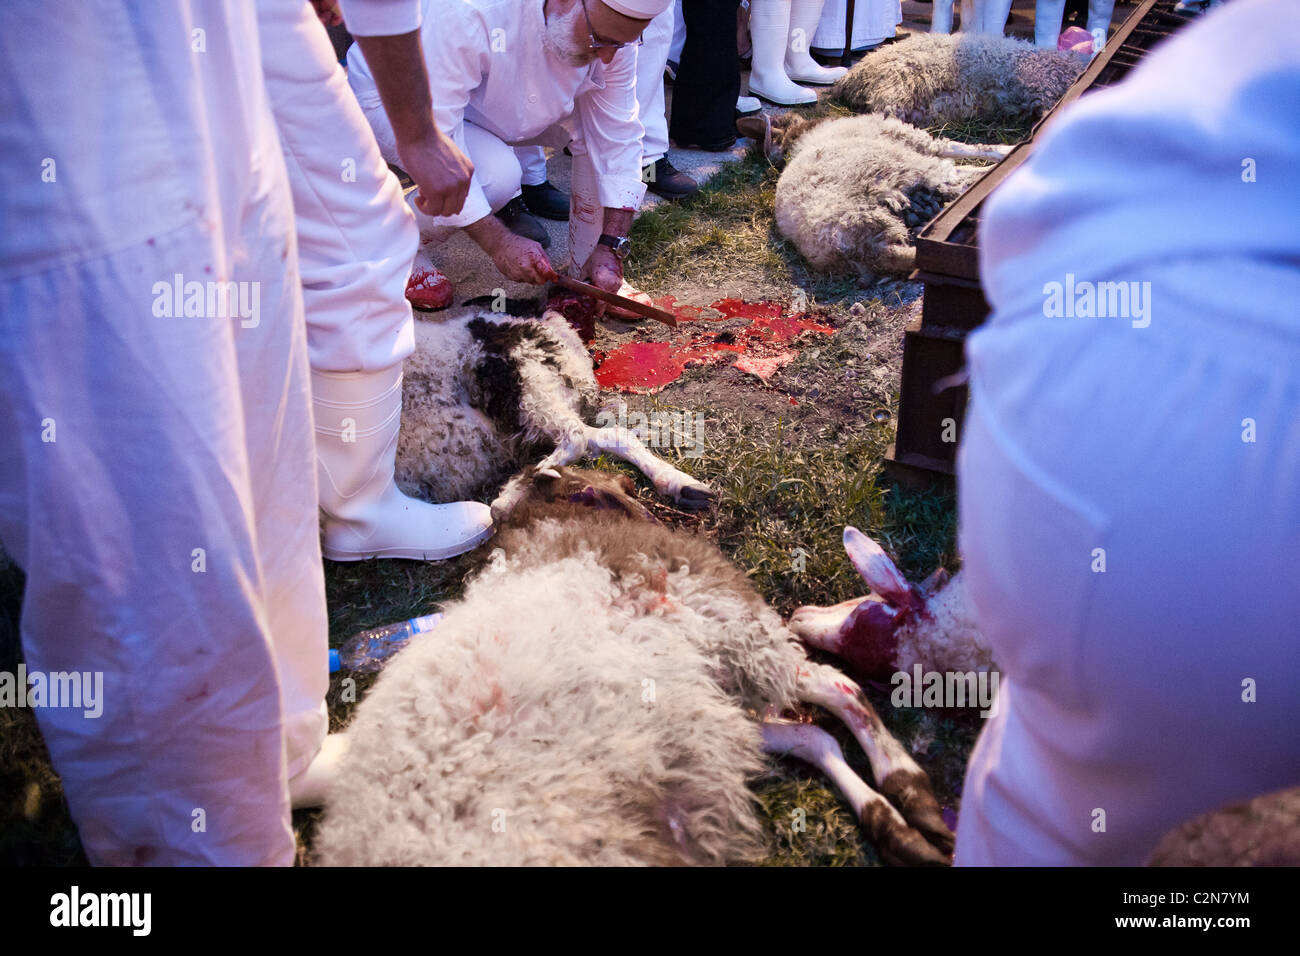 The sacrifice of some 50 lambs for Passover takes no more than a minute.  Mount Gerizim, Israel. 17/04/2011 Stock Photo - Alamy